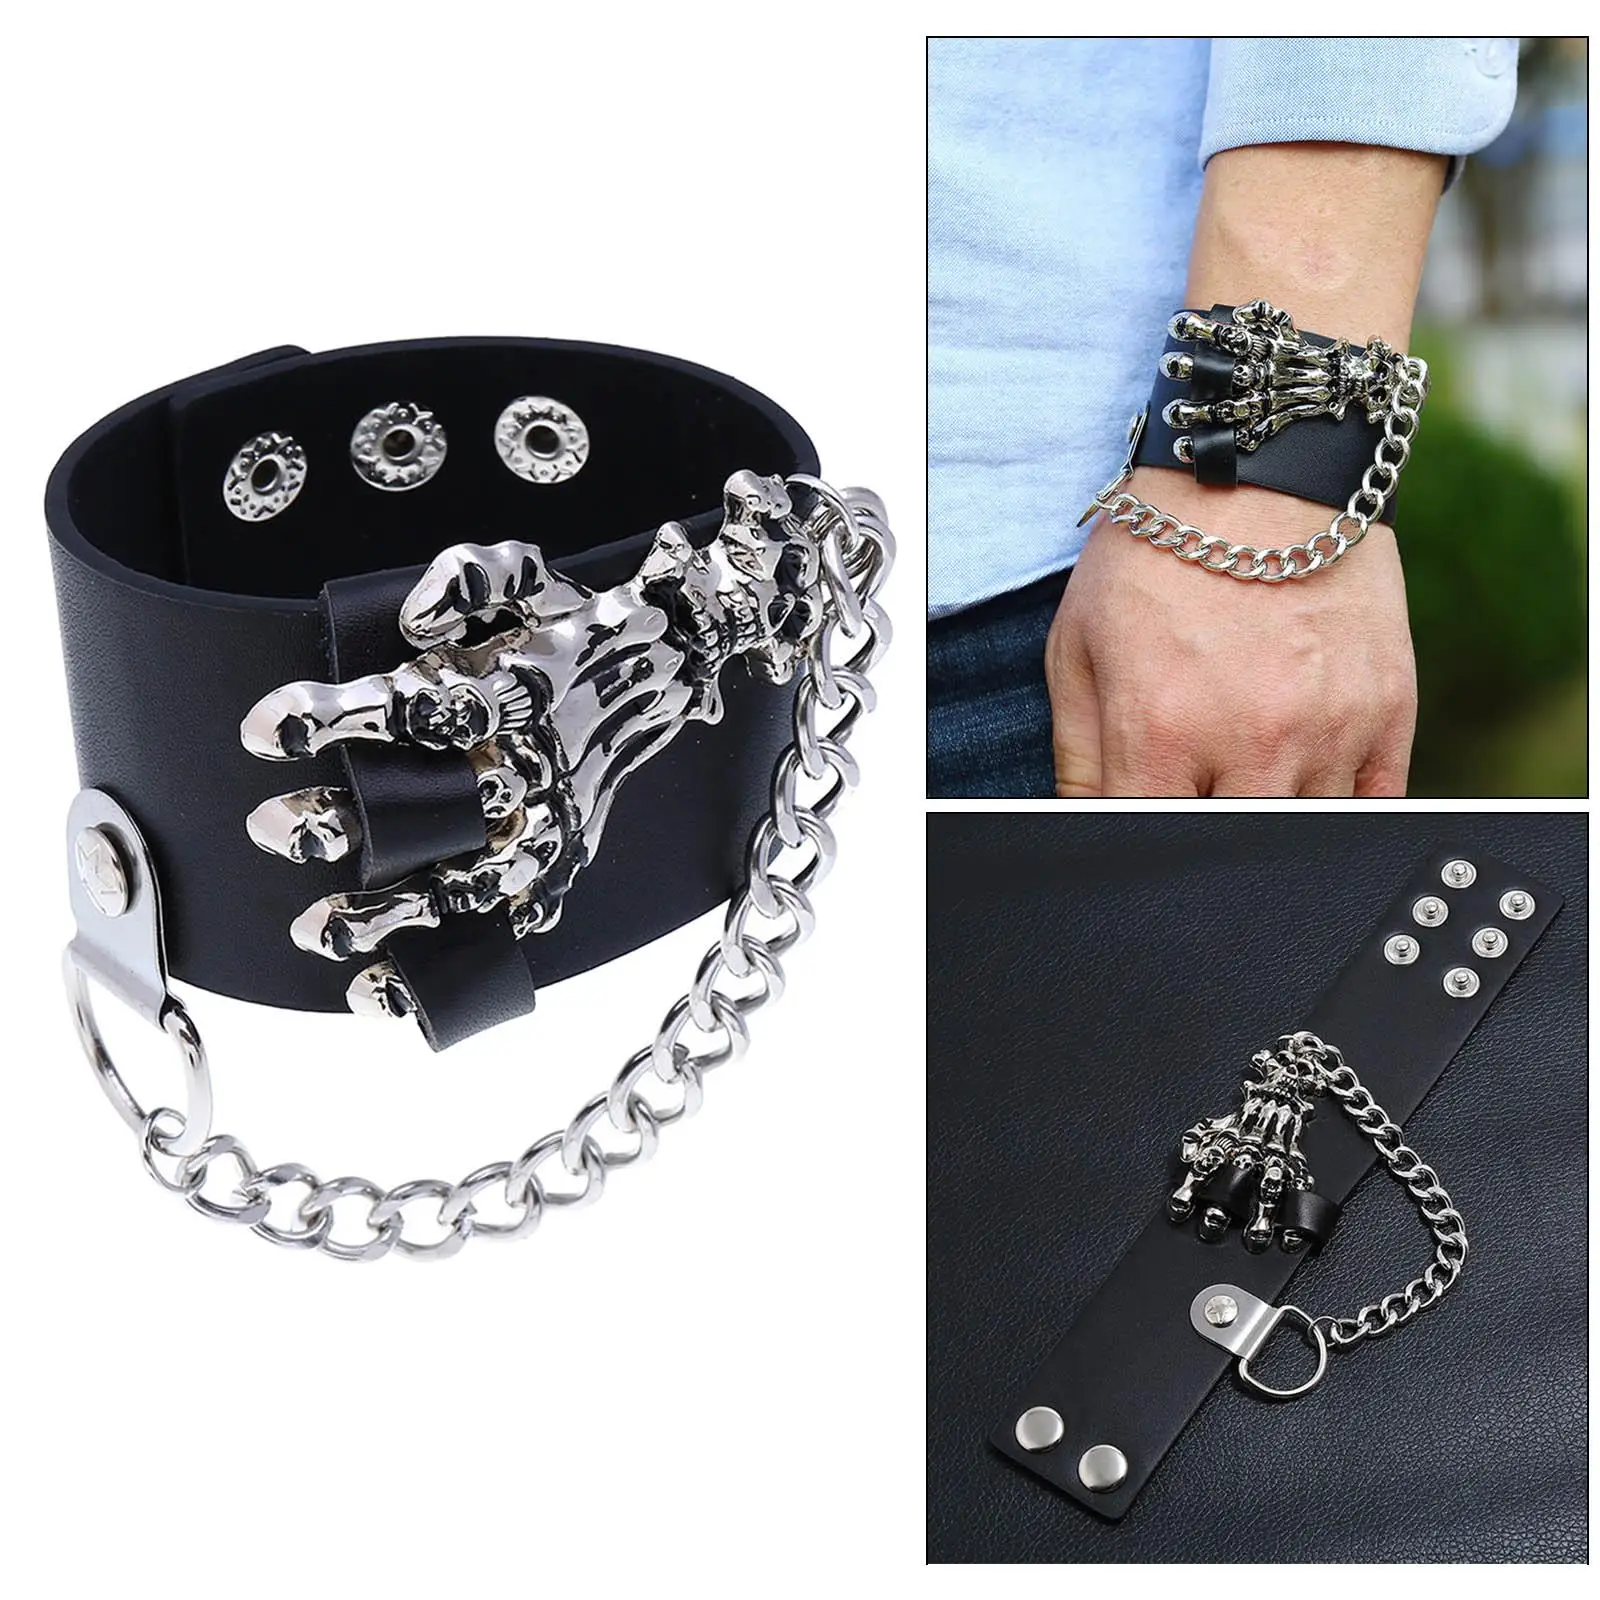 Punk PU Leather Bracelet with Chain Adjustable Gothic Rock Wristbands for Men Women Teen Girls Boys Daily wearing Holiday Prom